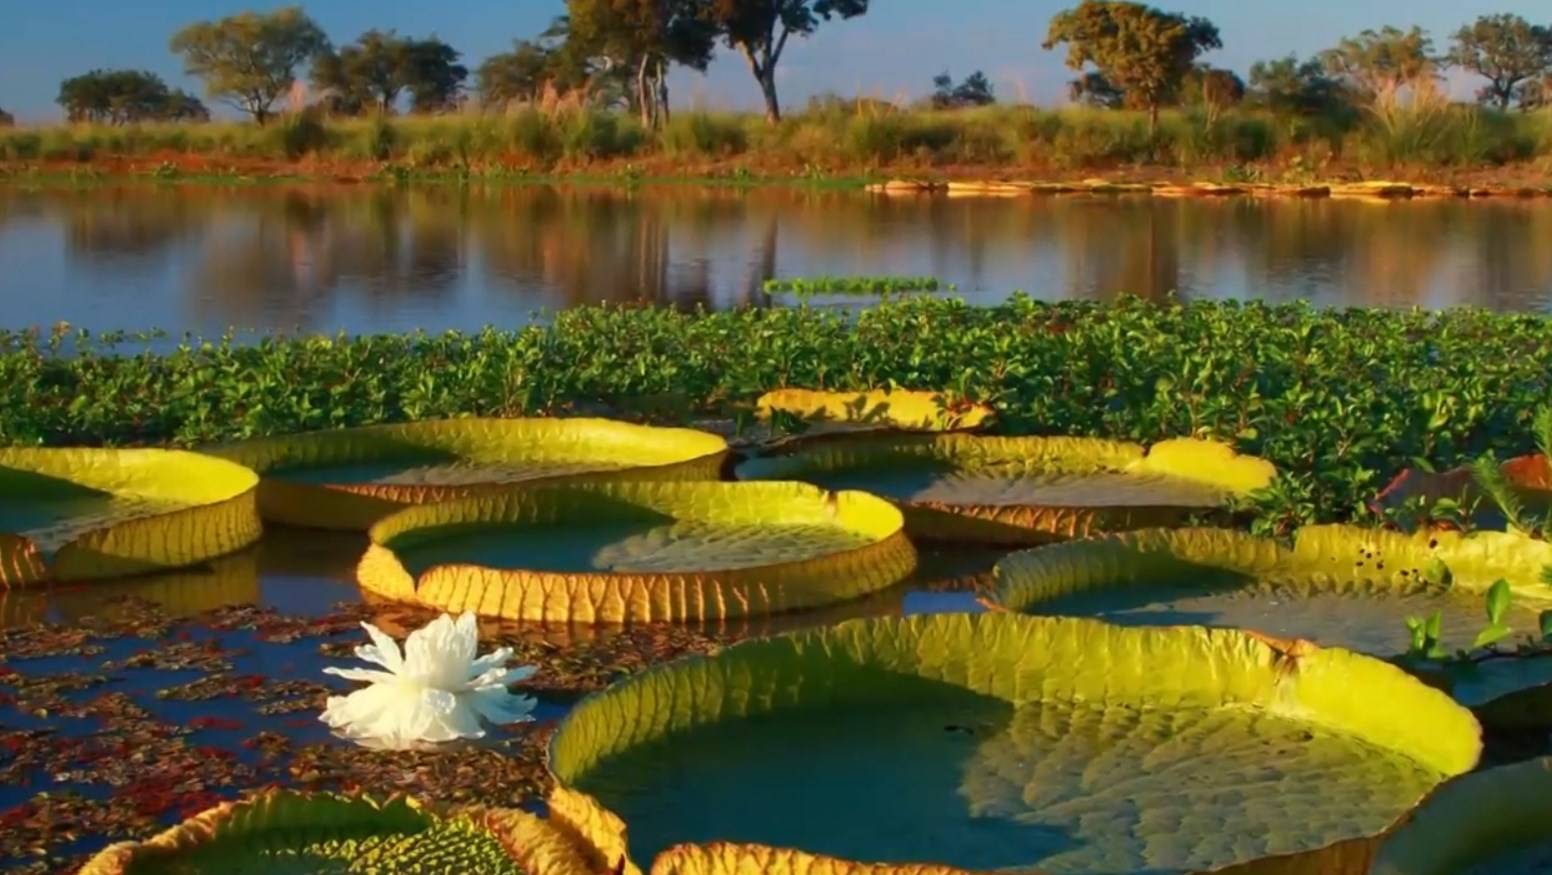 It includes a large number of islands, streams, lagoons and streams near the Paraná river.